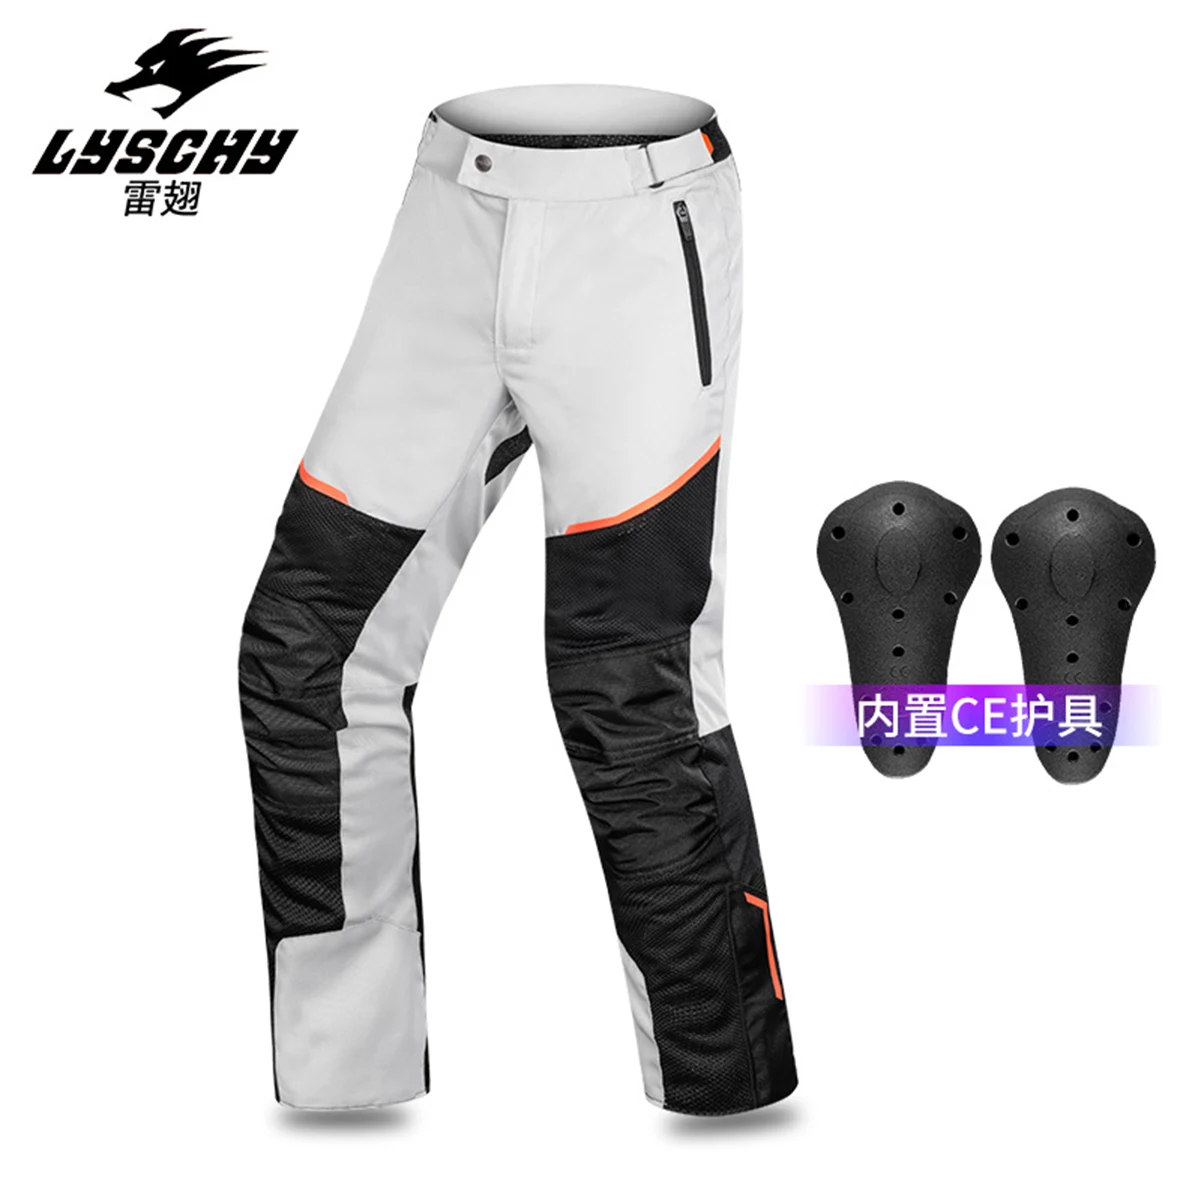 

LYSCHY Motorcycle Pants Men Trousers Waterproof Motocross Offroad Racing Riding Protective Pantalon Reflective Summer Breathable